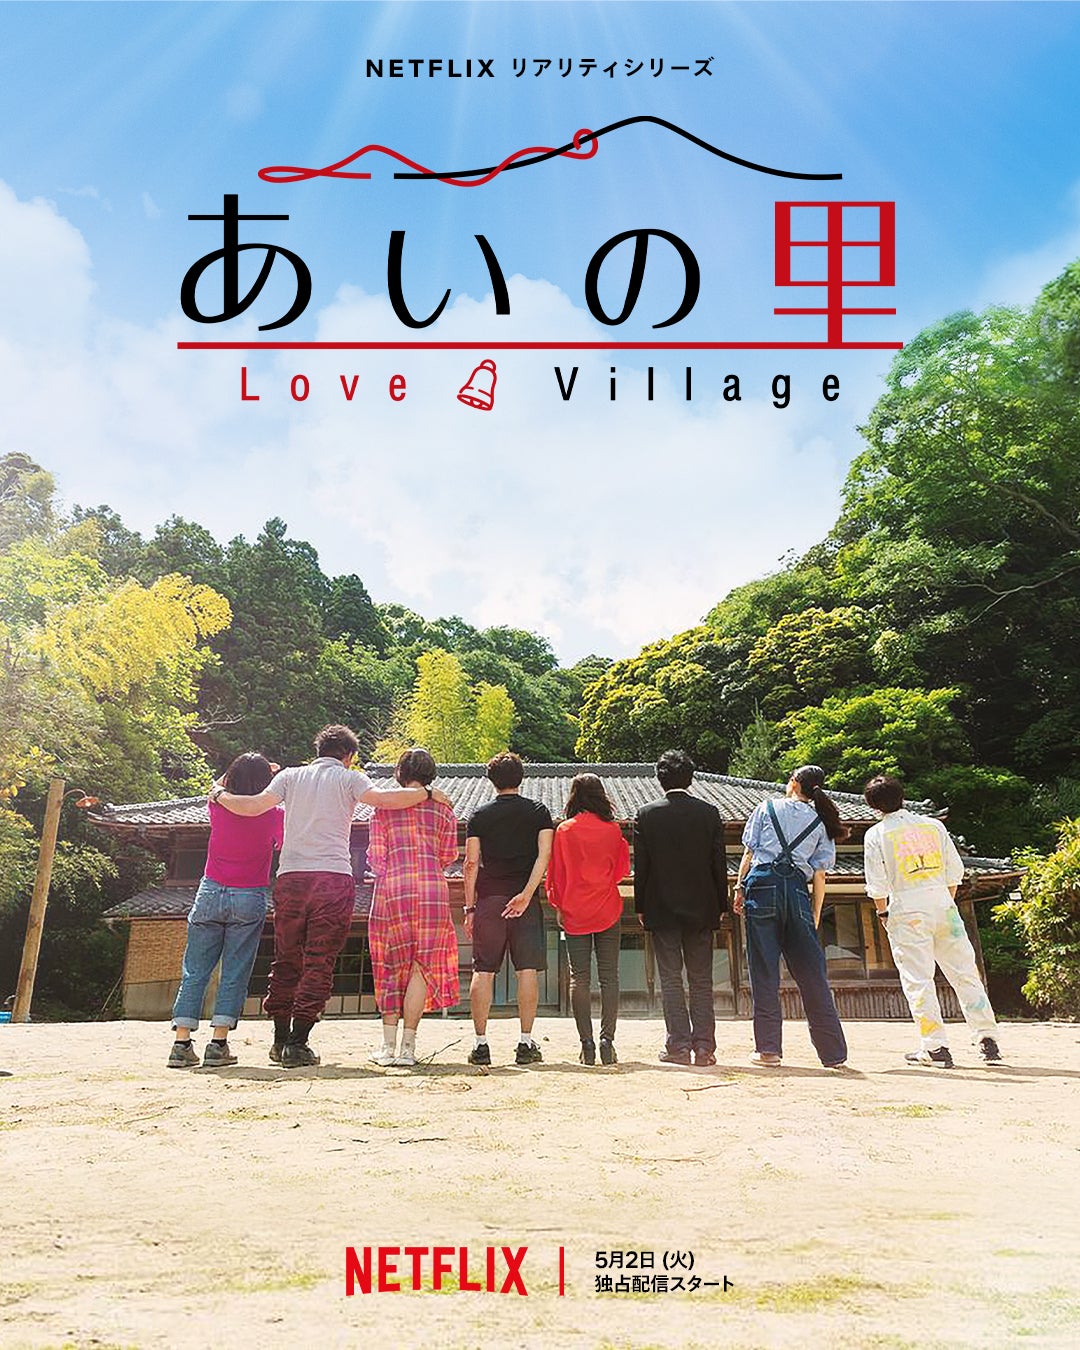 TV ratings for Love Village (あいの里) in Norway. Netflix TV series